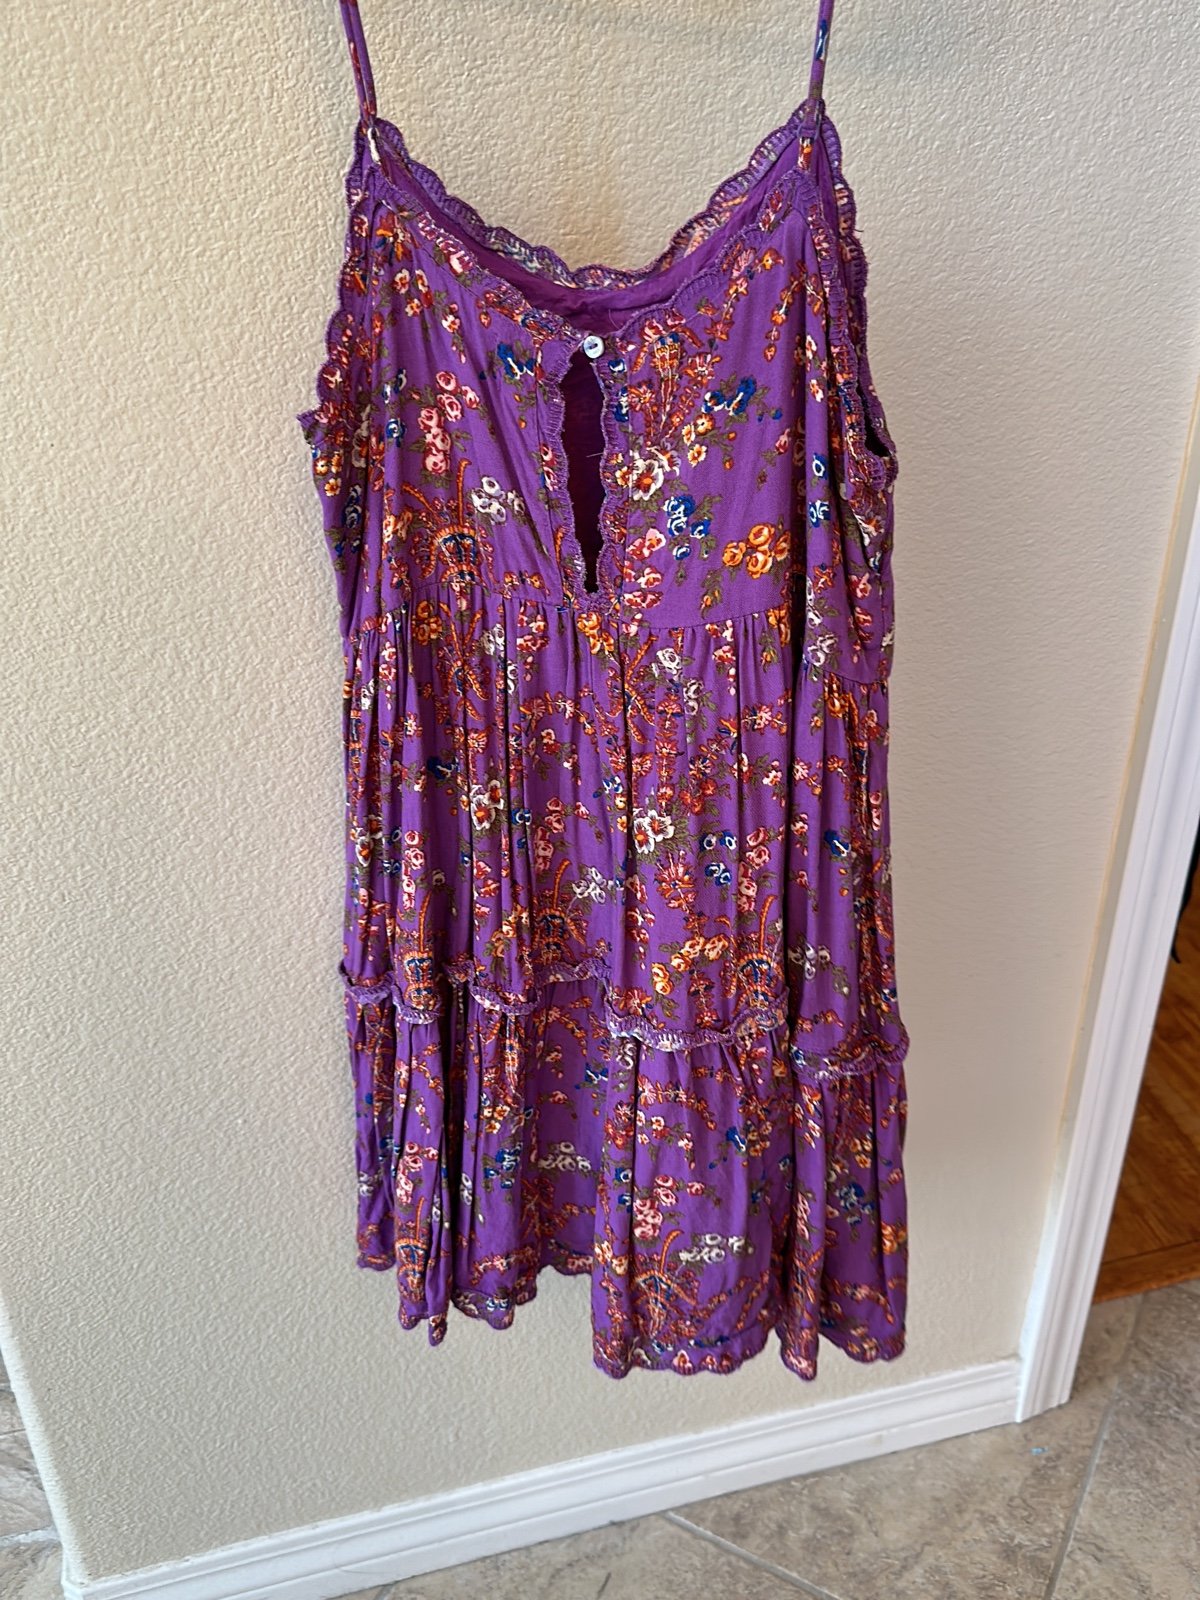 reasonable price Urban Outfitters dress lbzGSvDrS US Outlet